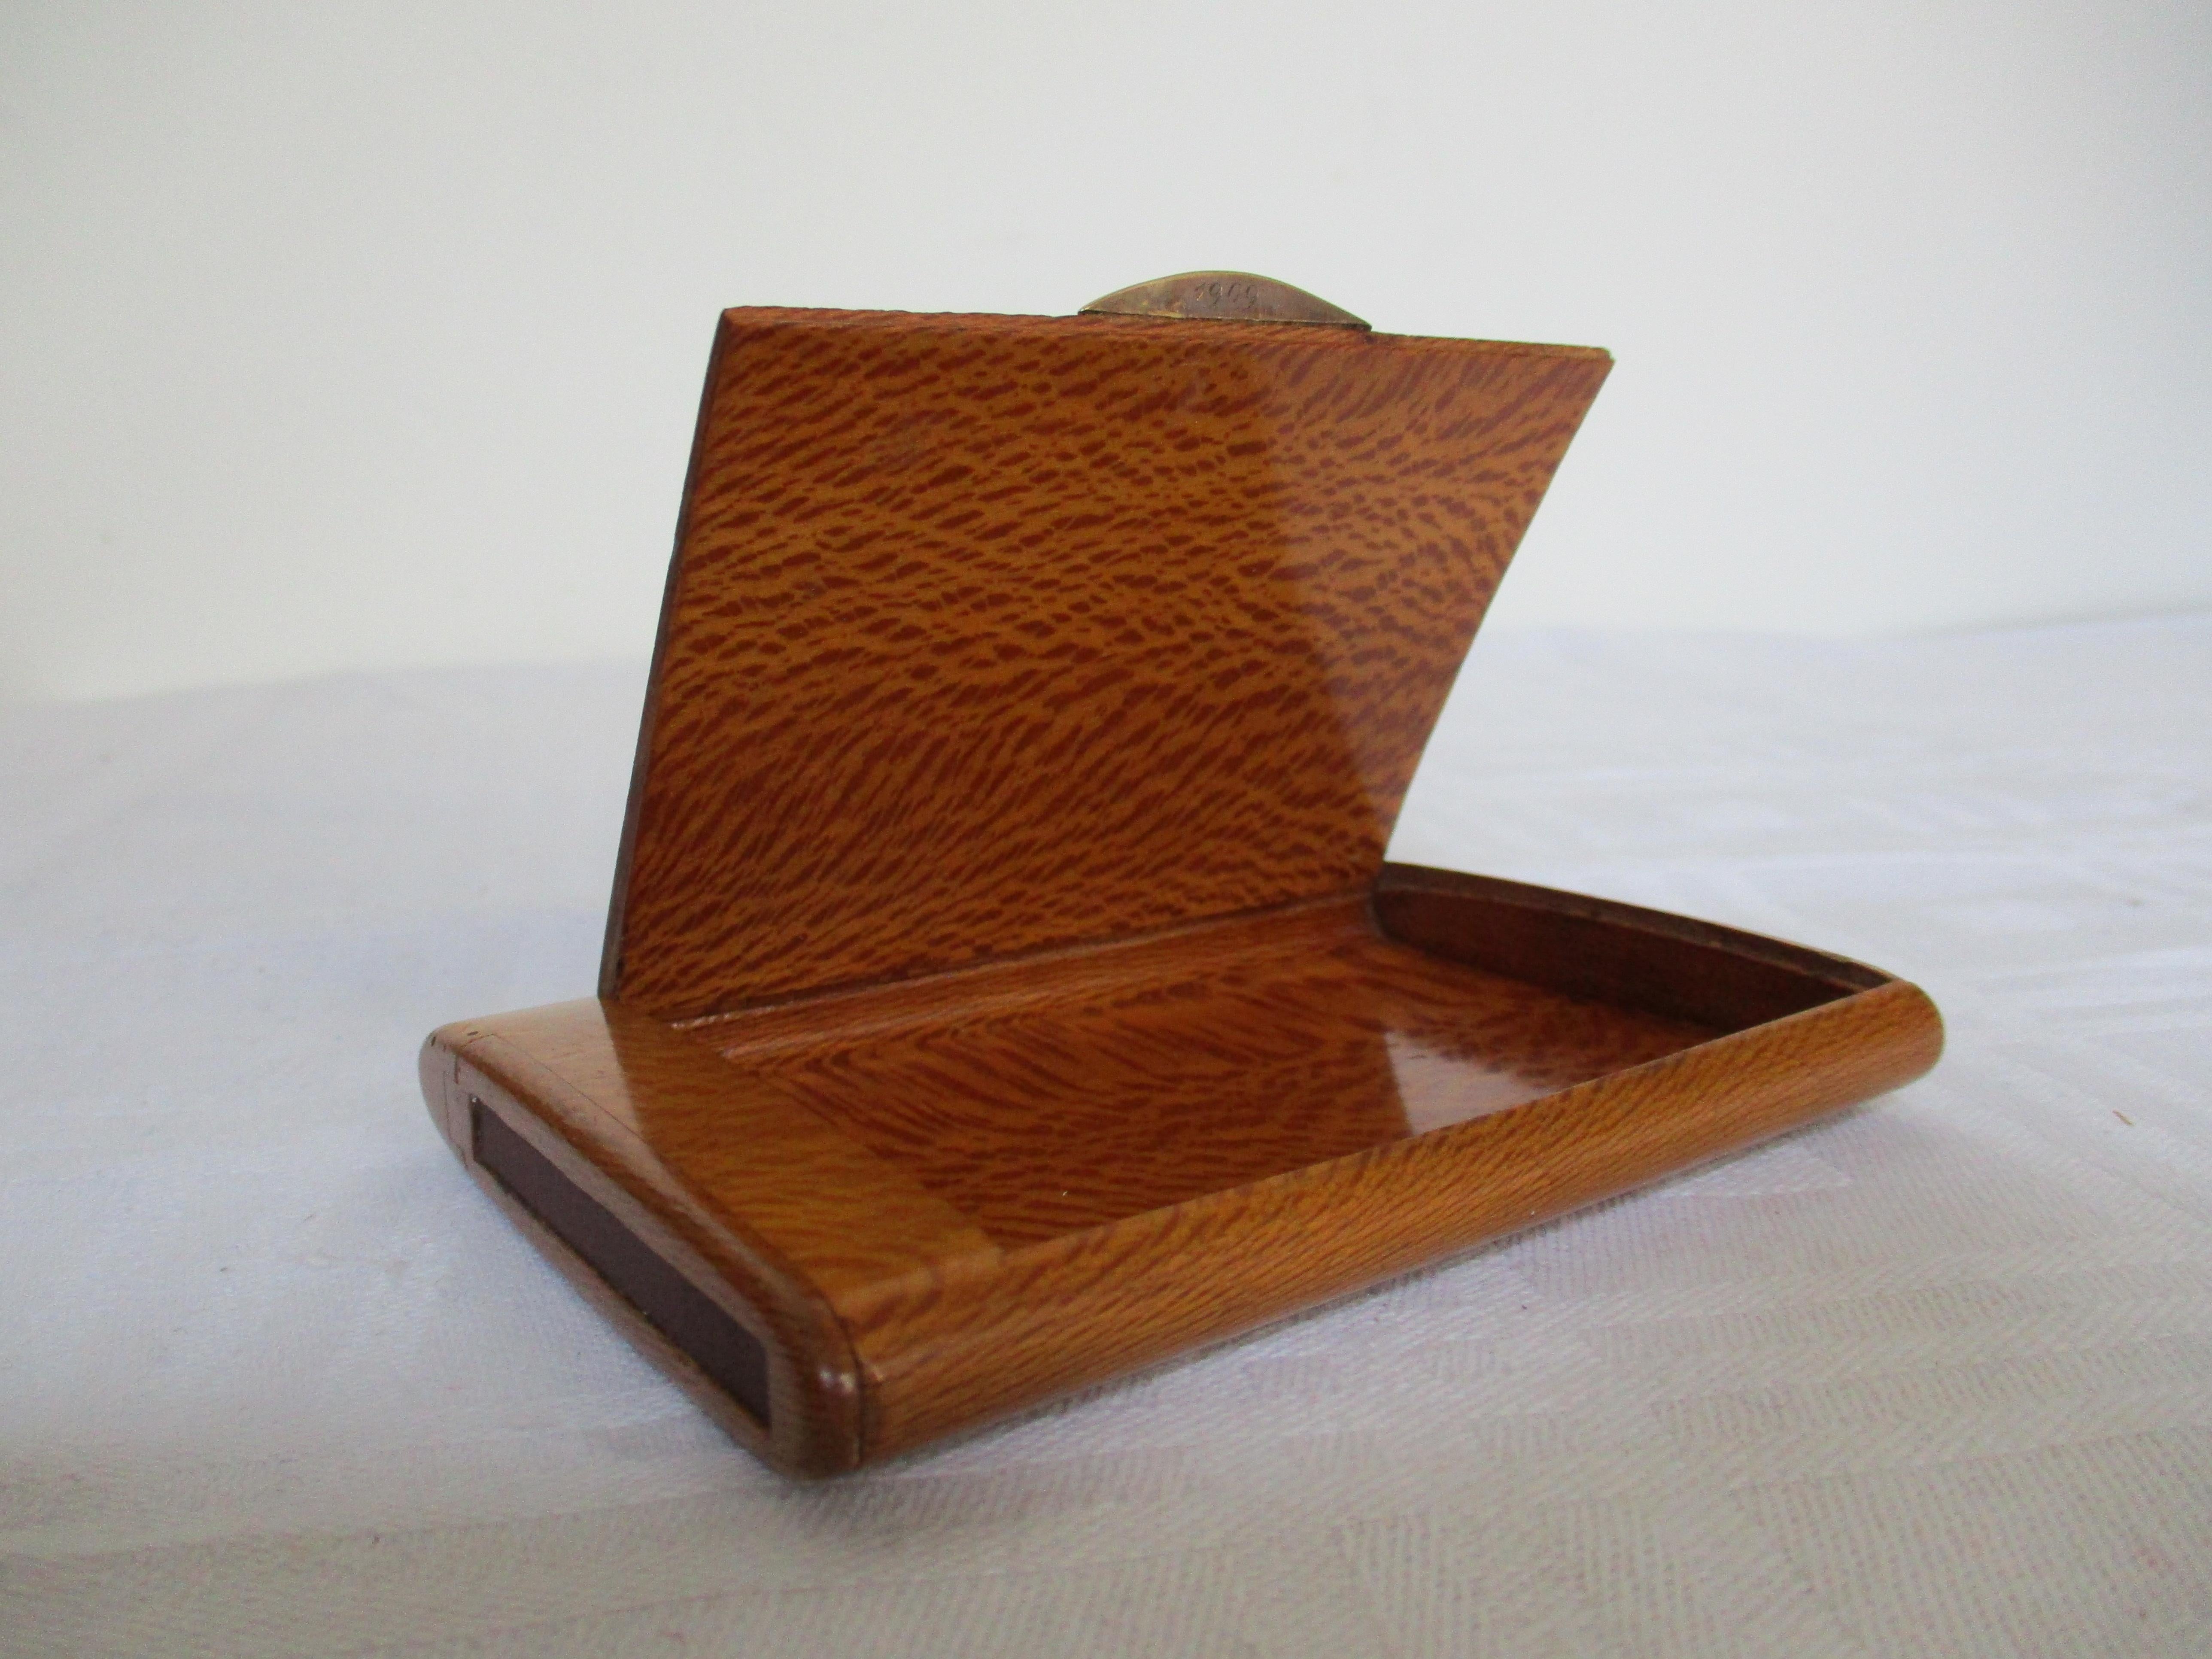 Beautiful wooden cigarette box with 14 carat solid gold handle with a sapphire. Line on the side to light up matches. 